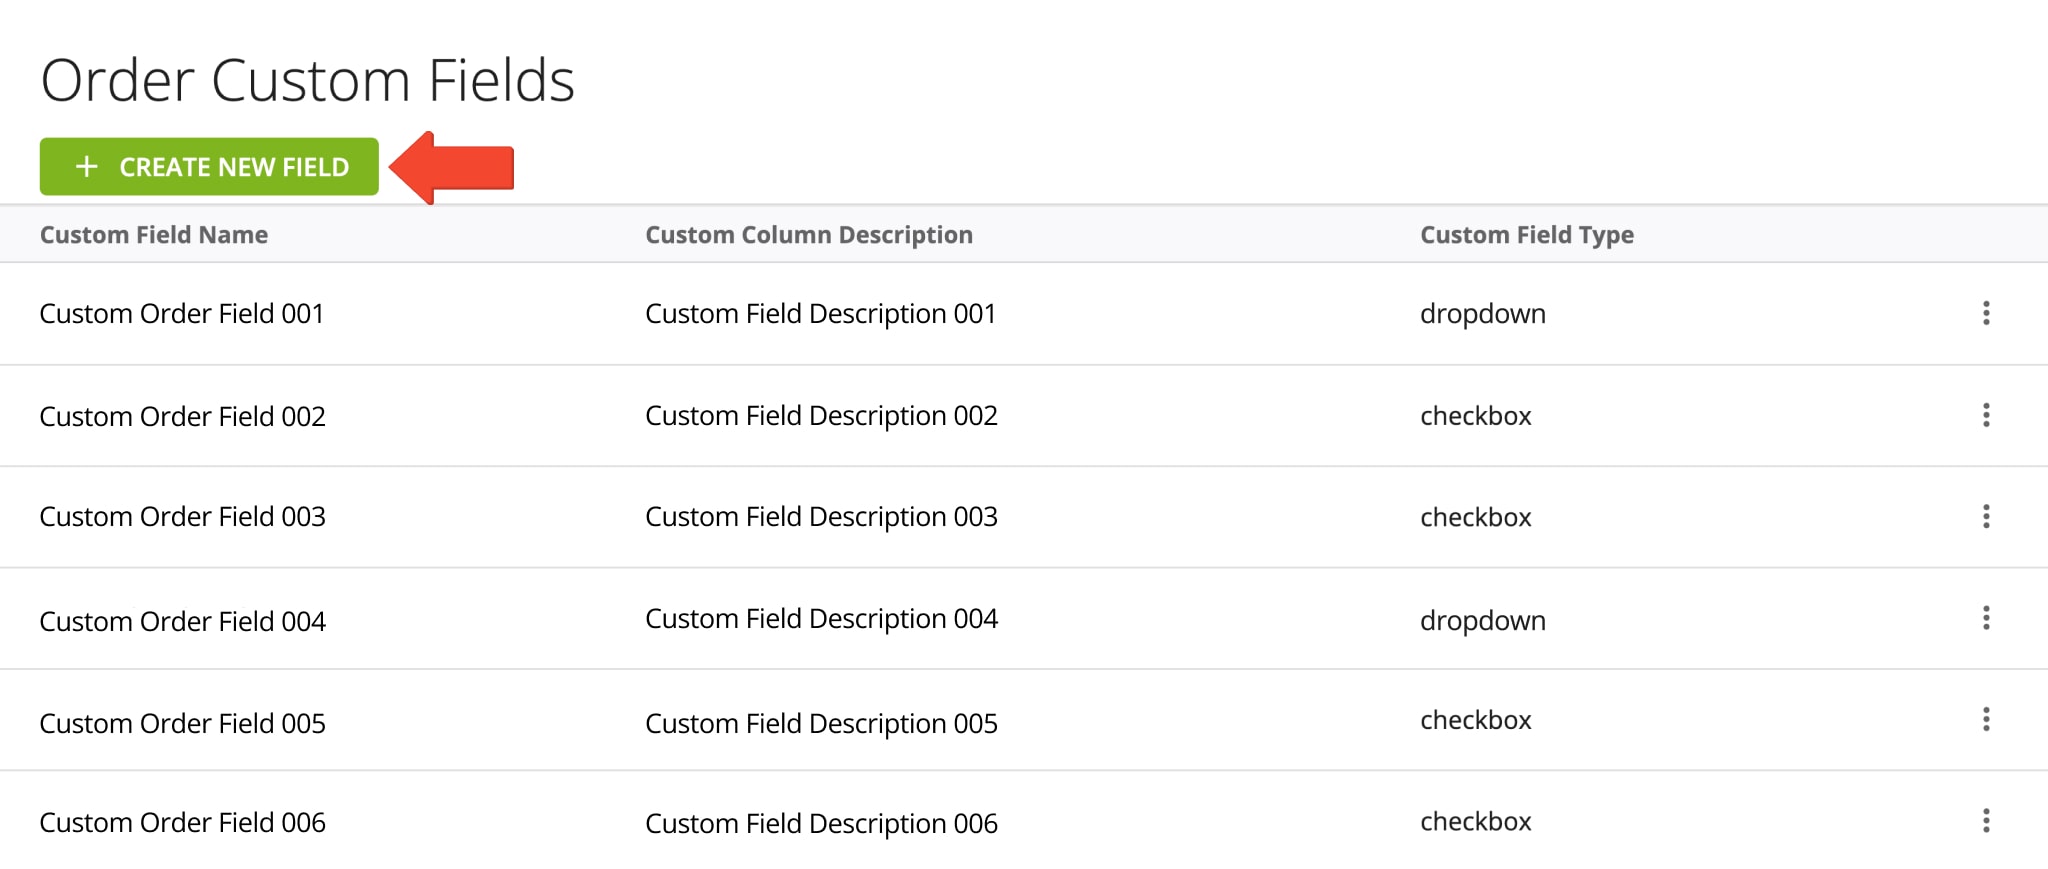 Create new Custom Order Fields to add unique user-defined statuses to your orders.